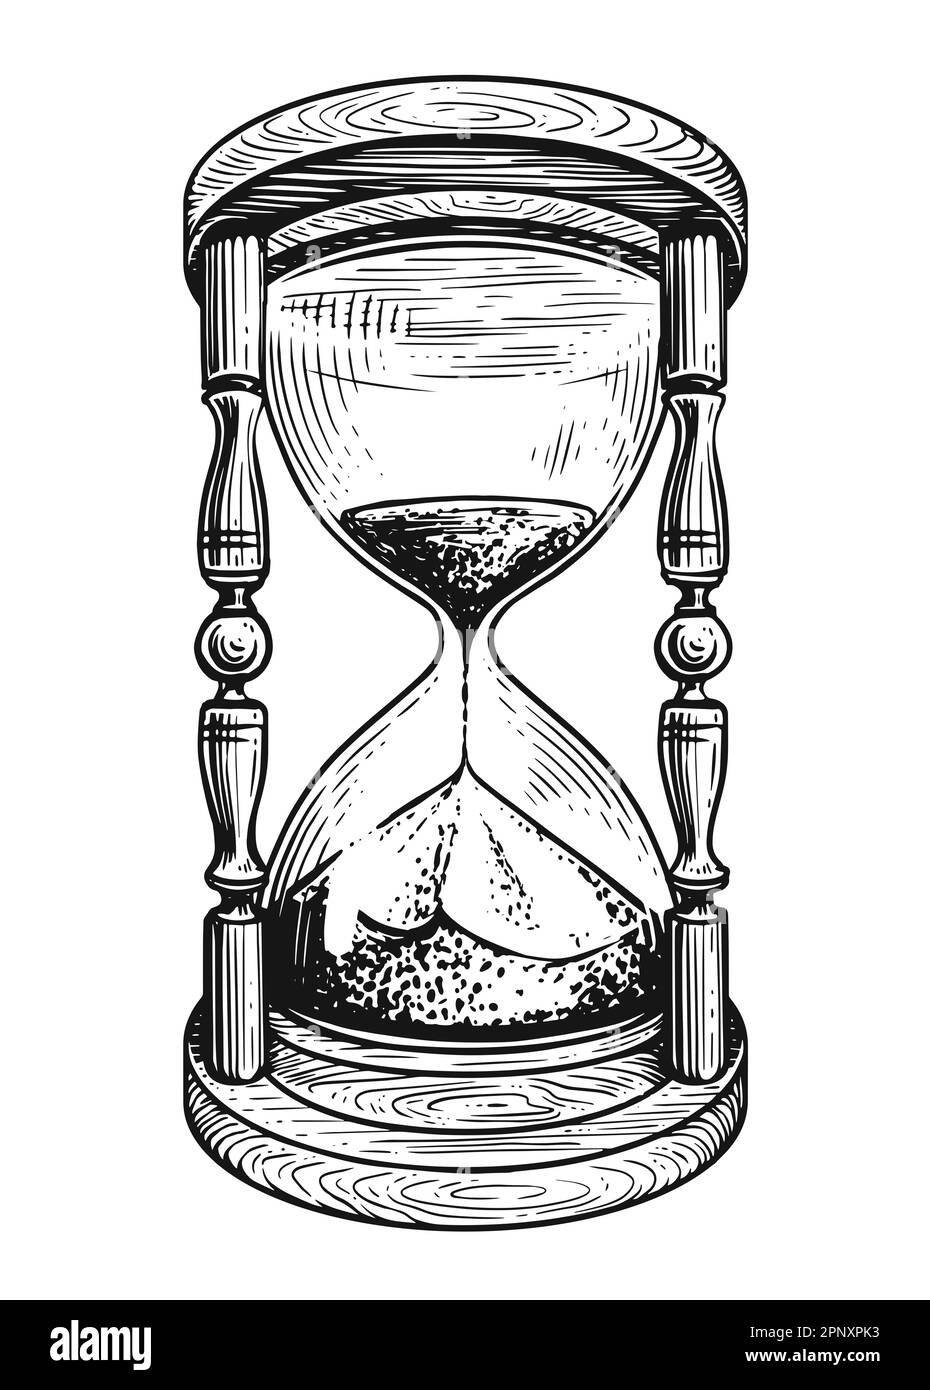 Hand drawn hourglass, sandglass in sketch style. Old sand timer ...